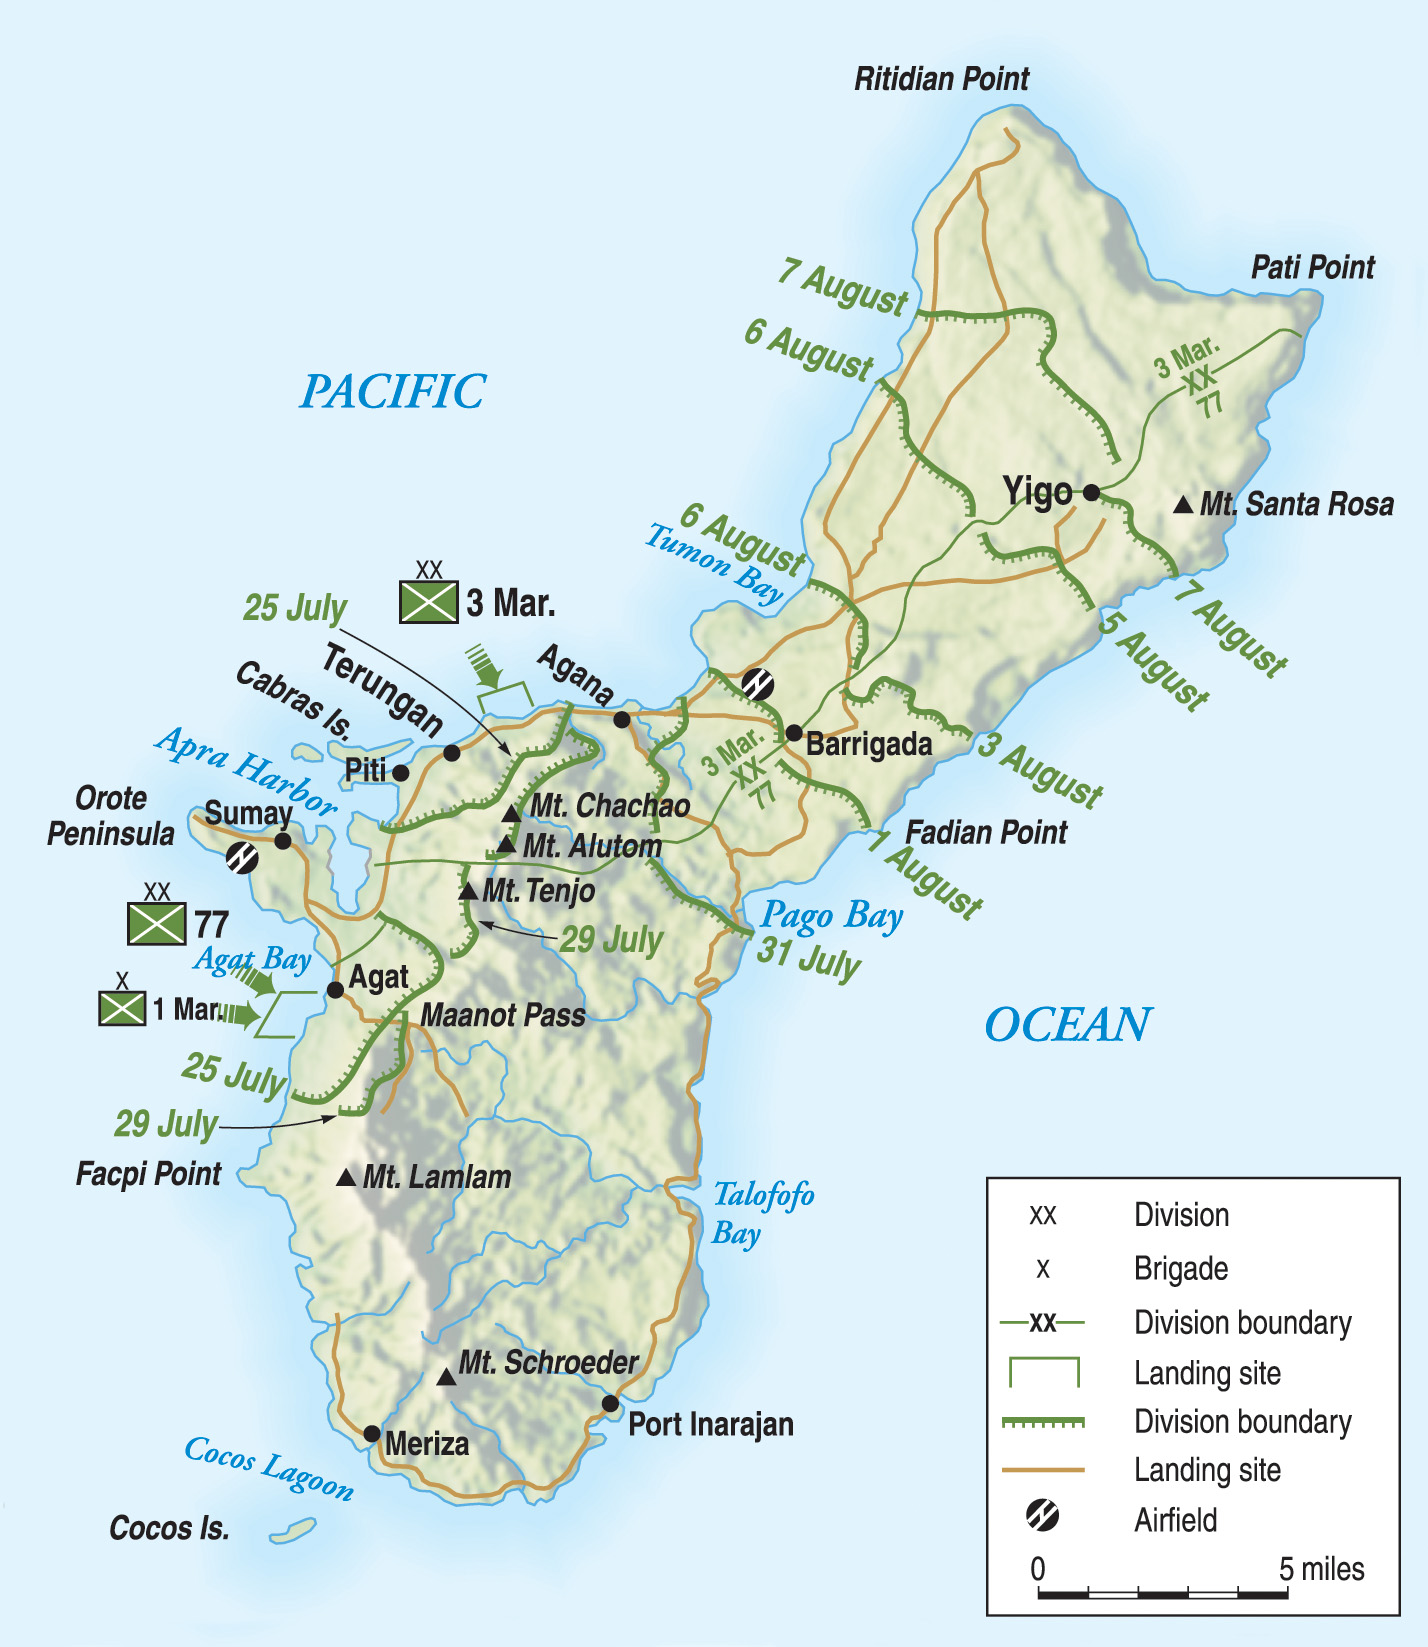 The American invasion beaches on the island of Guam included several locations on the island’s west coast, where soldiers of the Army’s 77th Infantry Division and Marines of the III Amphibious Corps were to come ashore. The American’s then wheeled to the North with the 77th moving up the east side of the island.